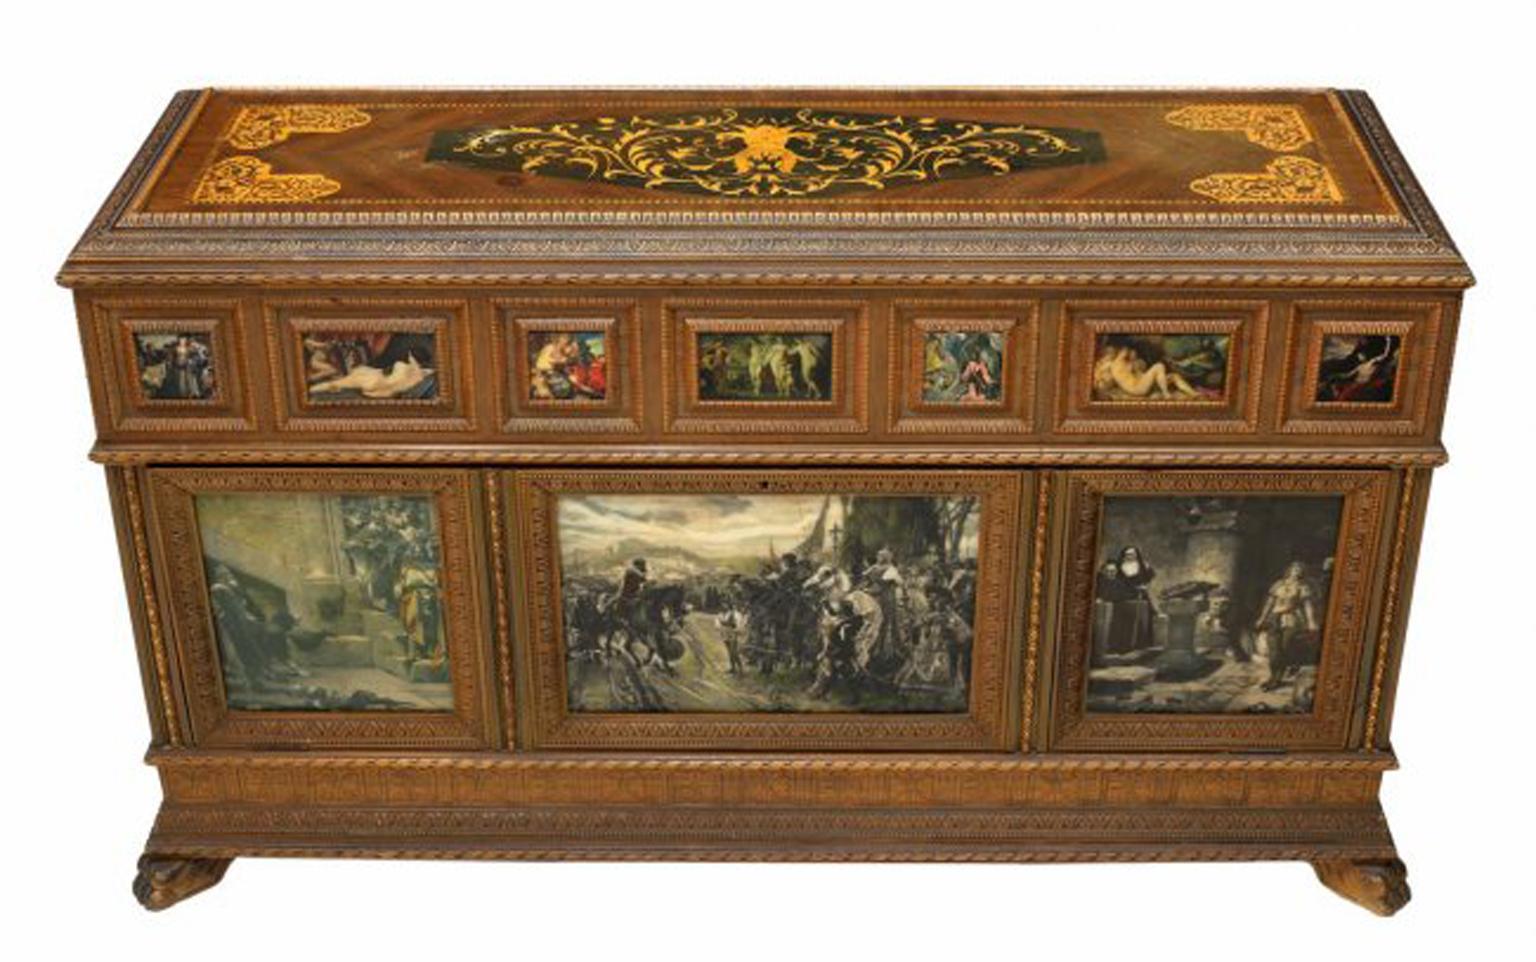 One of a kind Italian neoclassical style inlaid satinwood and fruitwood cassone.
20th century.
The beautifully inlaid hinged rectangular top is over another satinwood pull-out top revealing a long storage compartment, both over a beautiful frieze